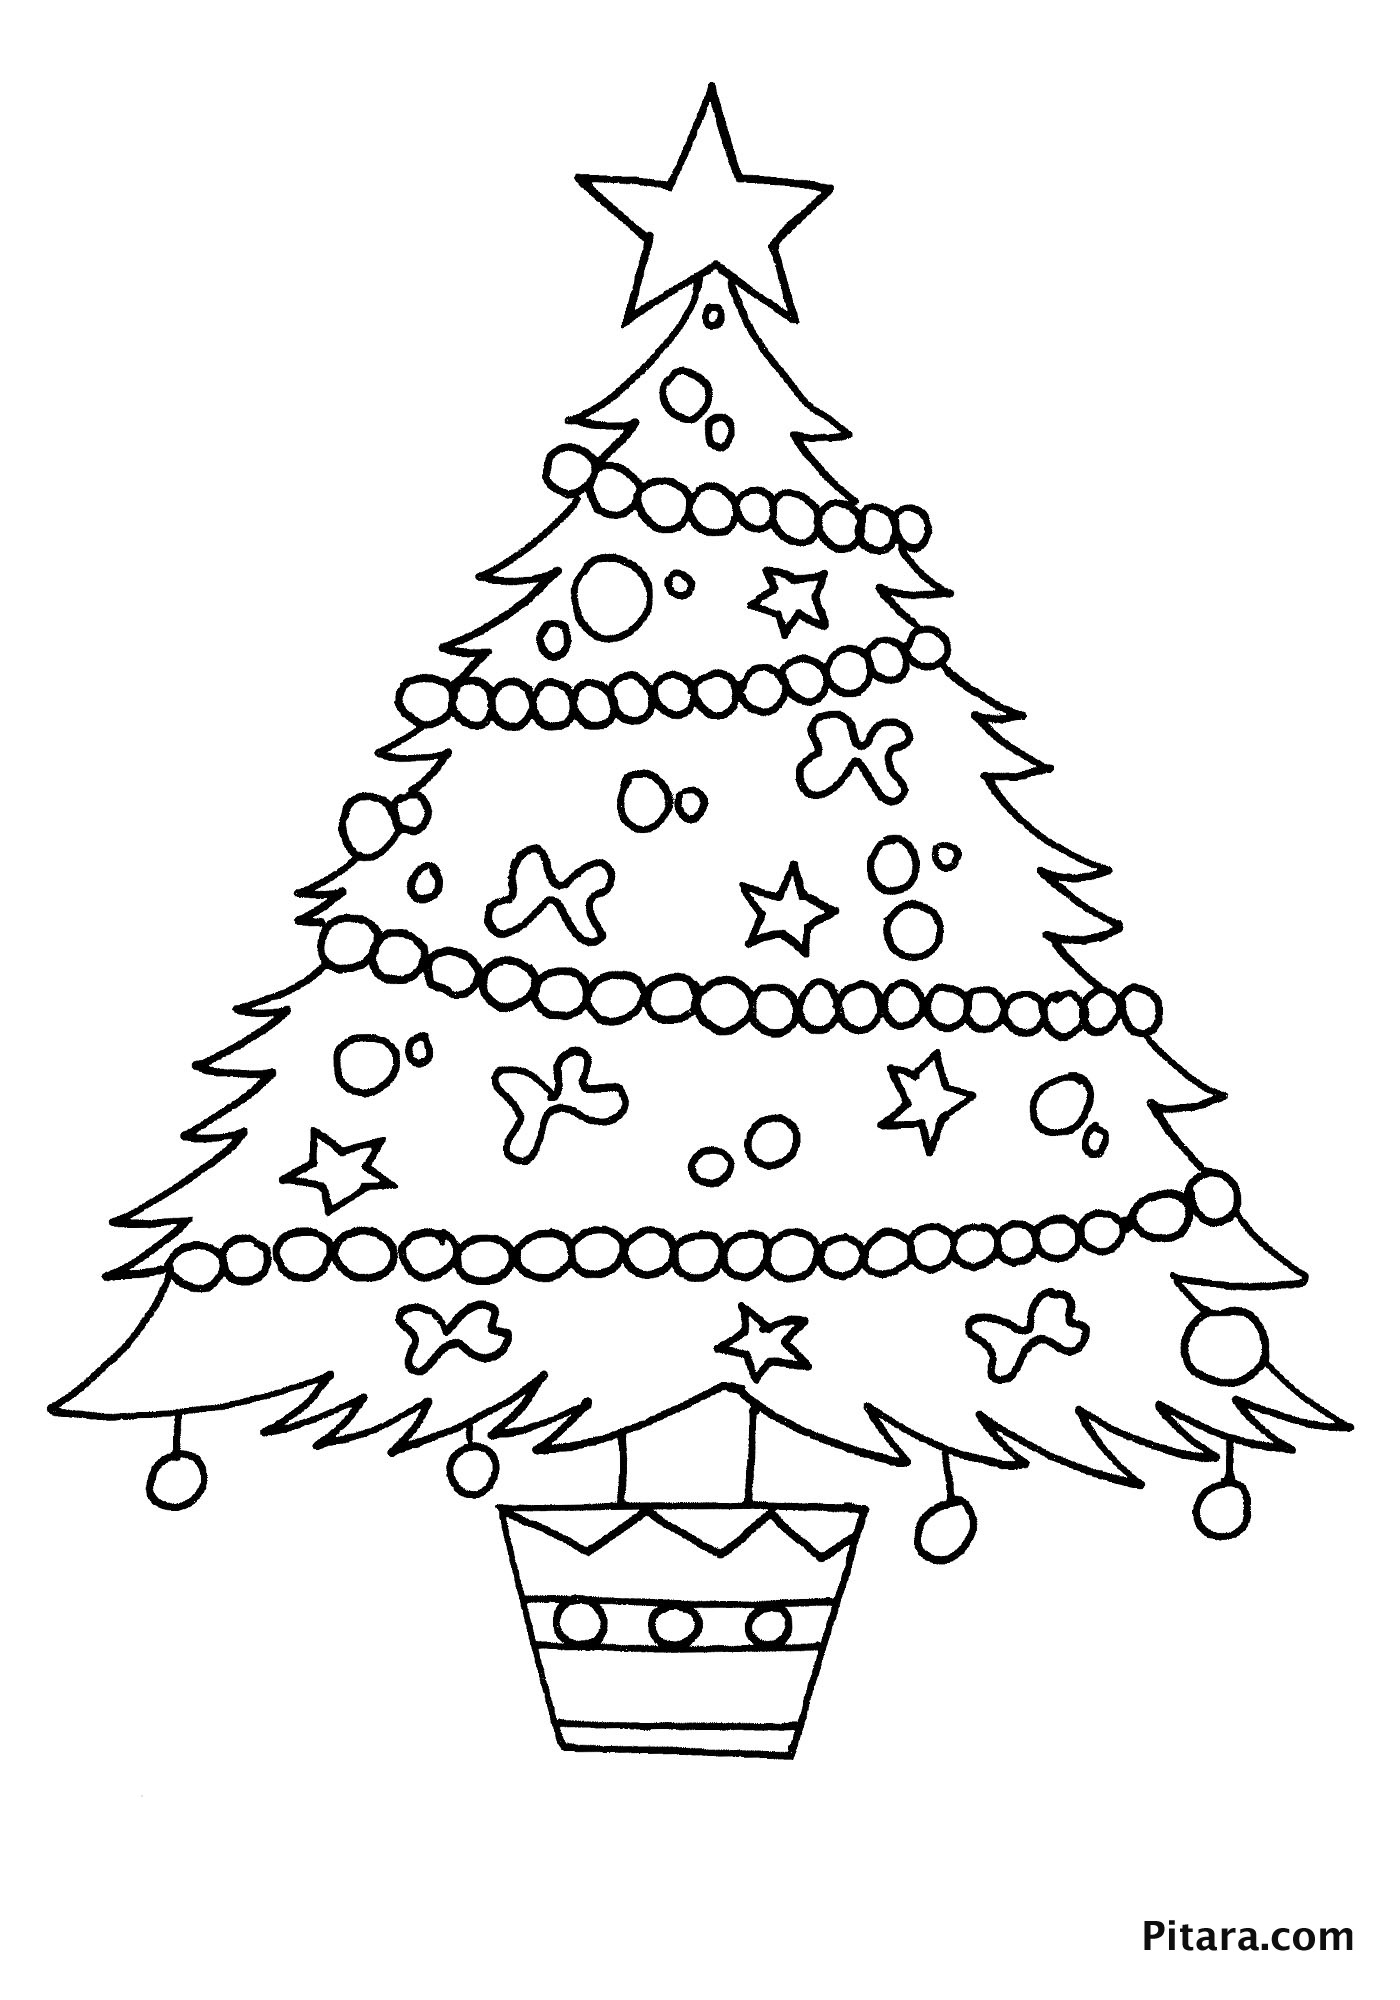 Christmas Coloring Pages for Kids Pitara Kids Network